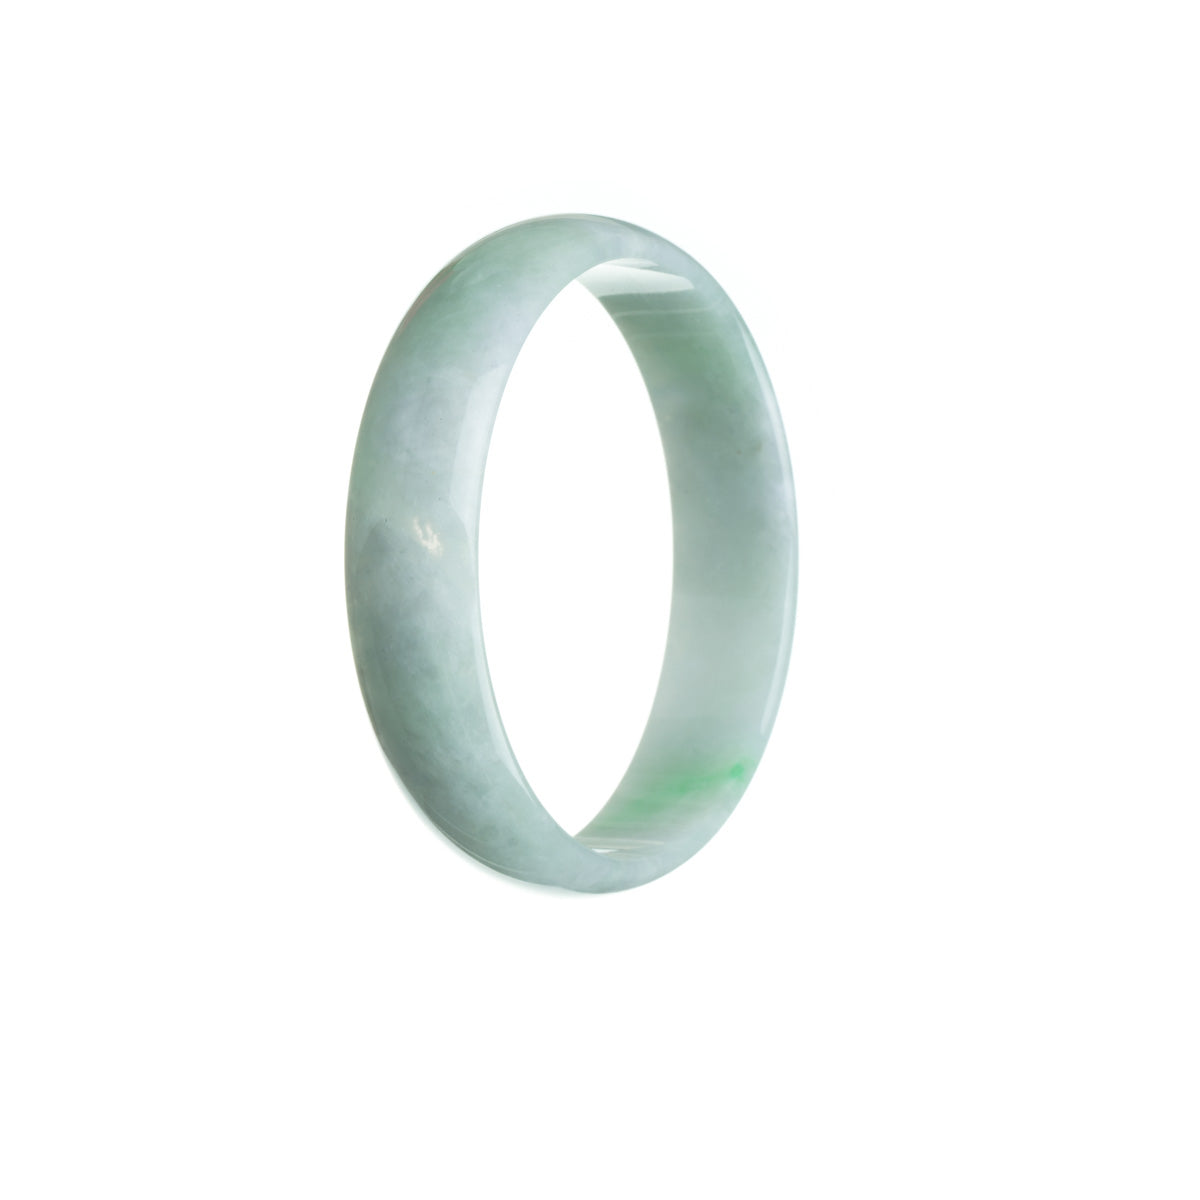 A close-up of a white and green traditional jade bangle with a flat design, measuring 52mm.